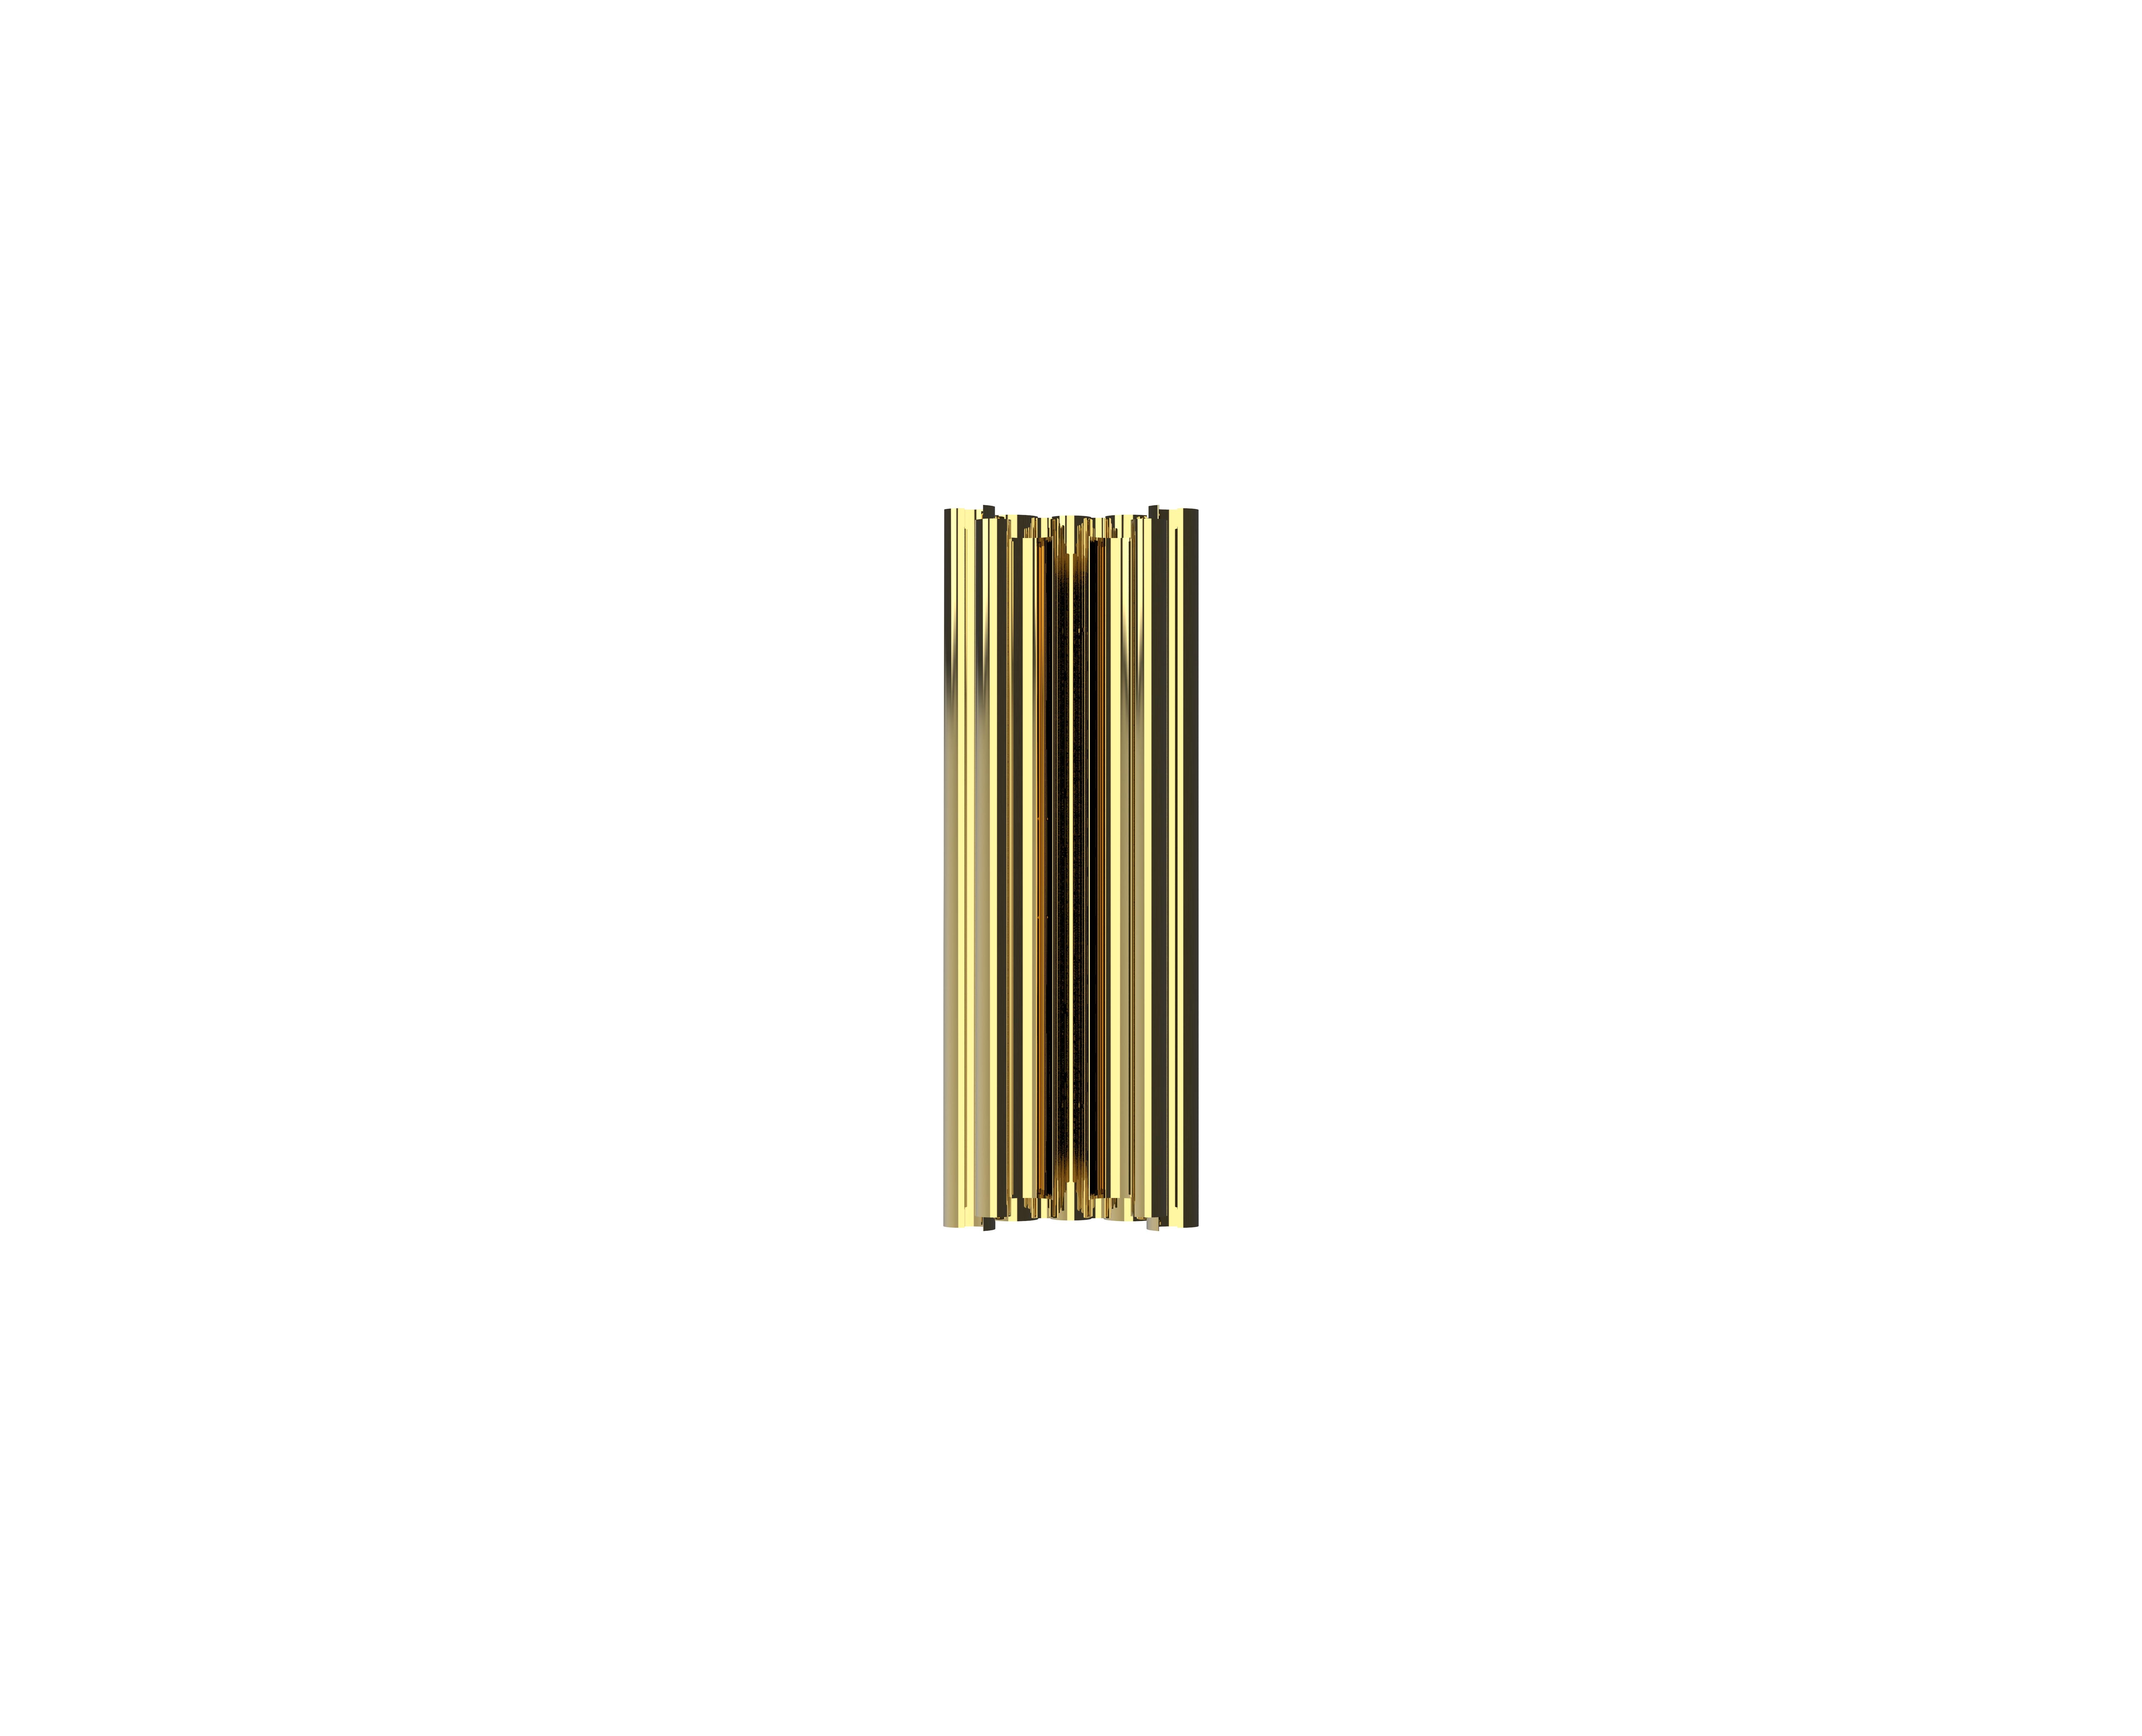 Parker Wall Light in Polished Brass with Ribbed Exterior In New Condition For Sale In New York, NY